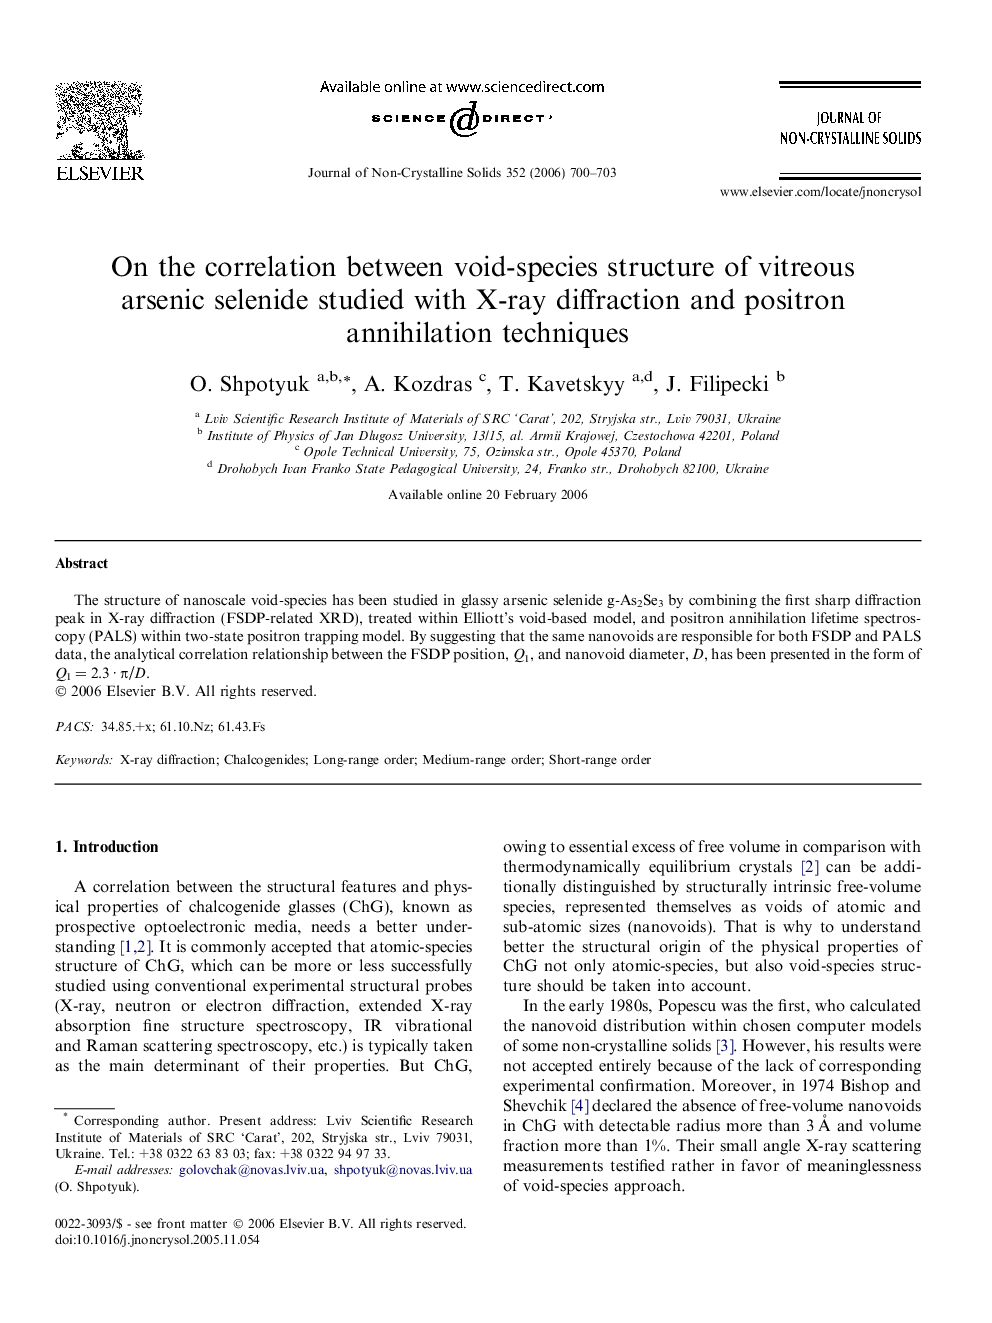 On the correlation between void-species structure of vitreous arsenic selenide studied with X-ray diffraction and positron annihilation techniques